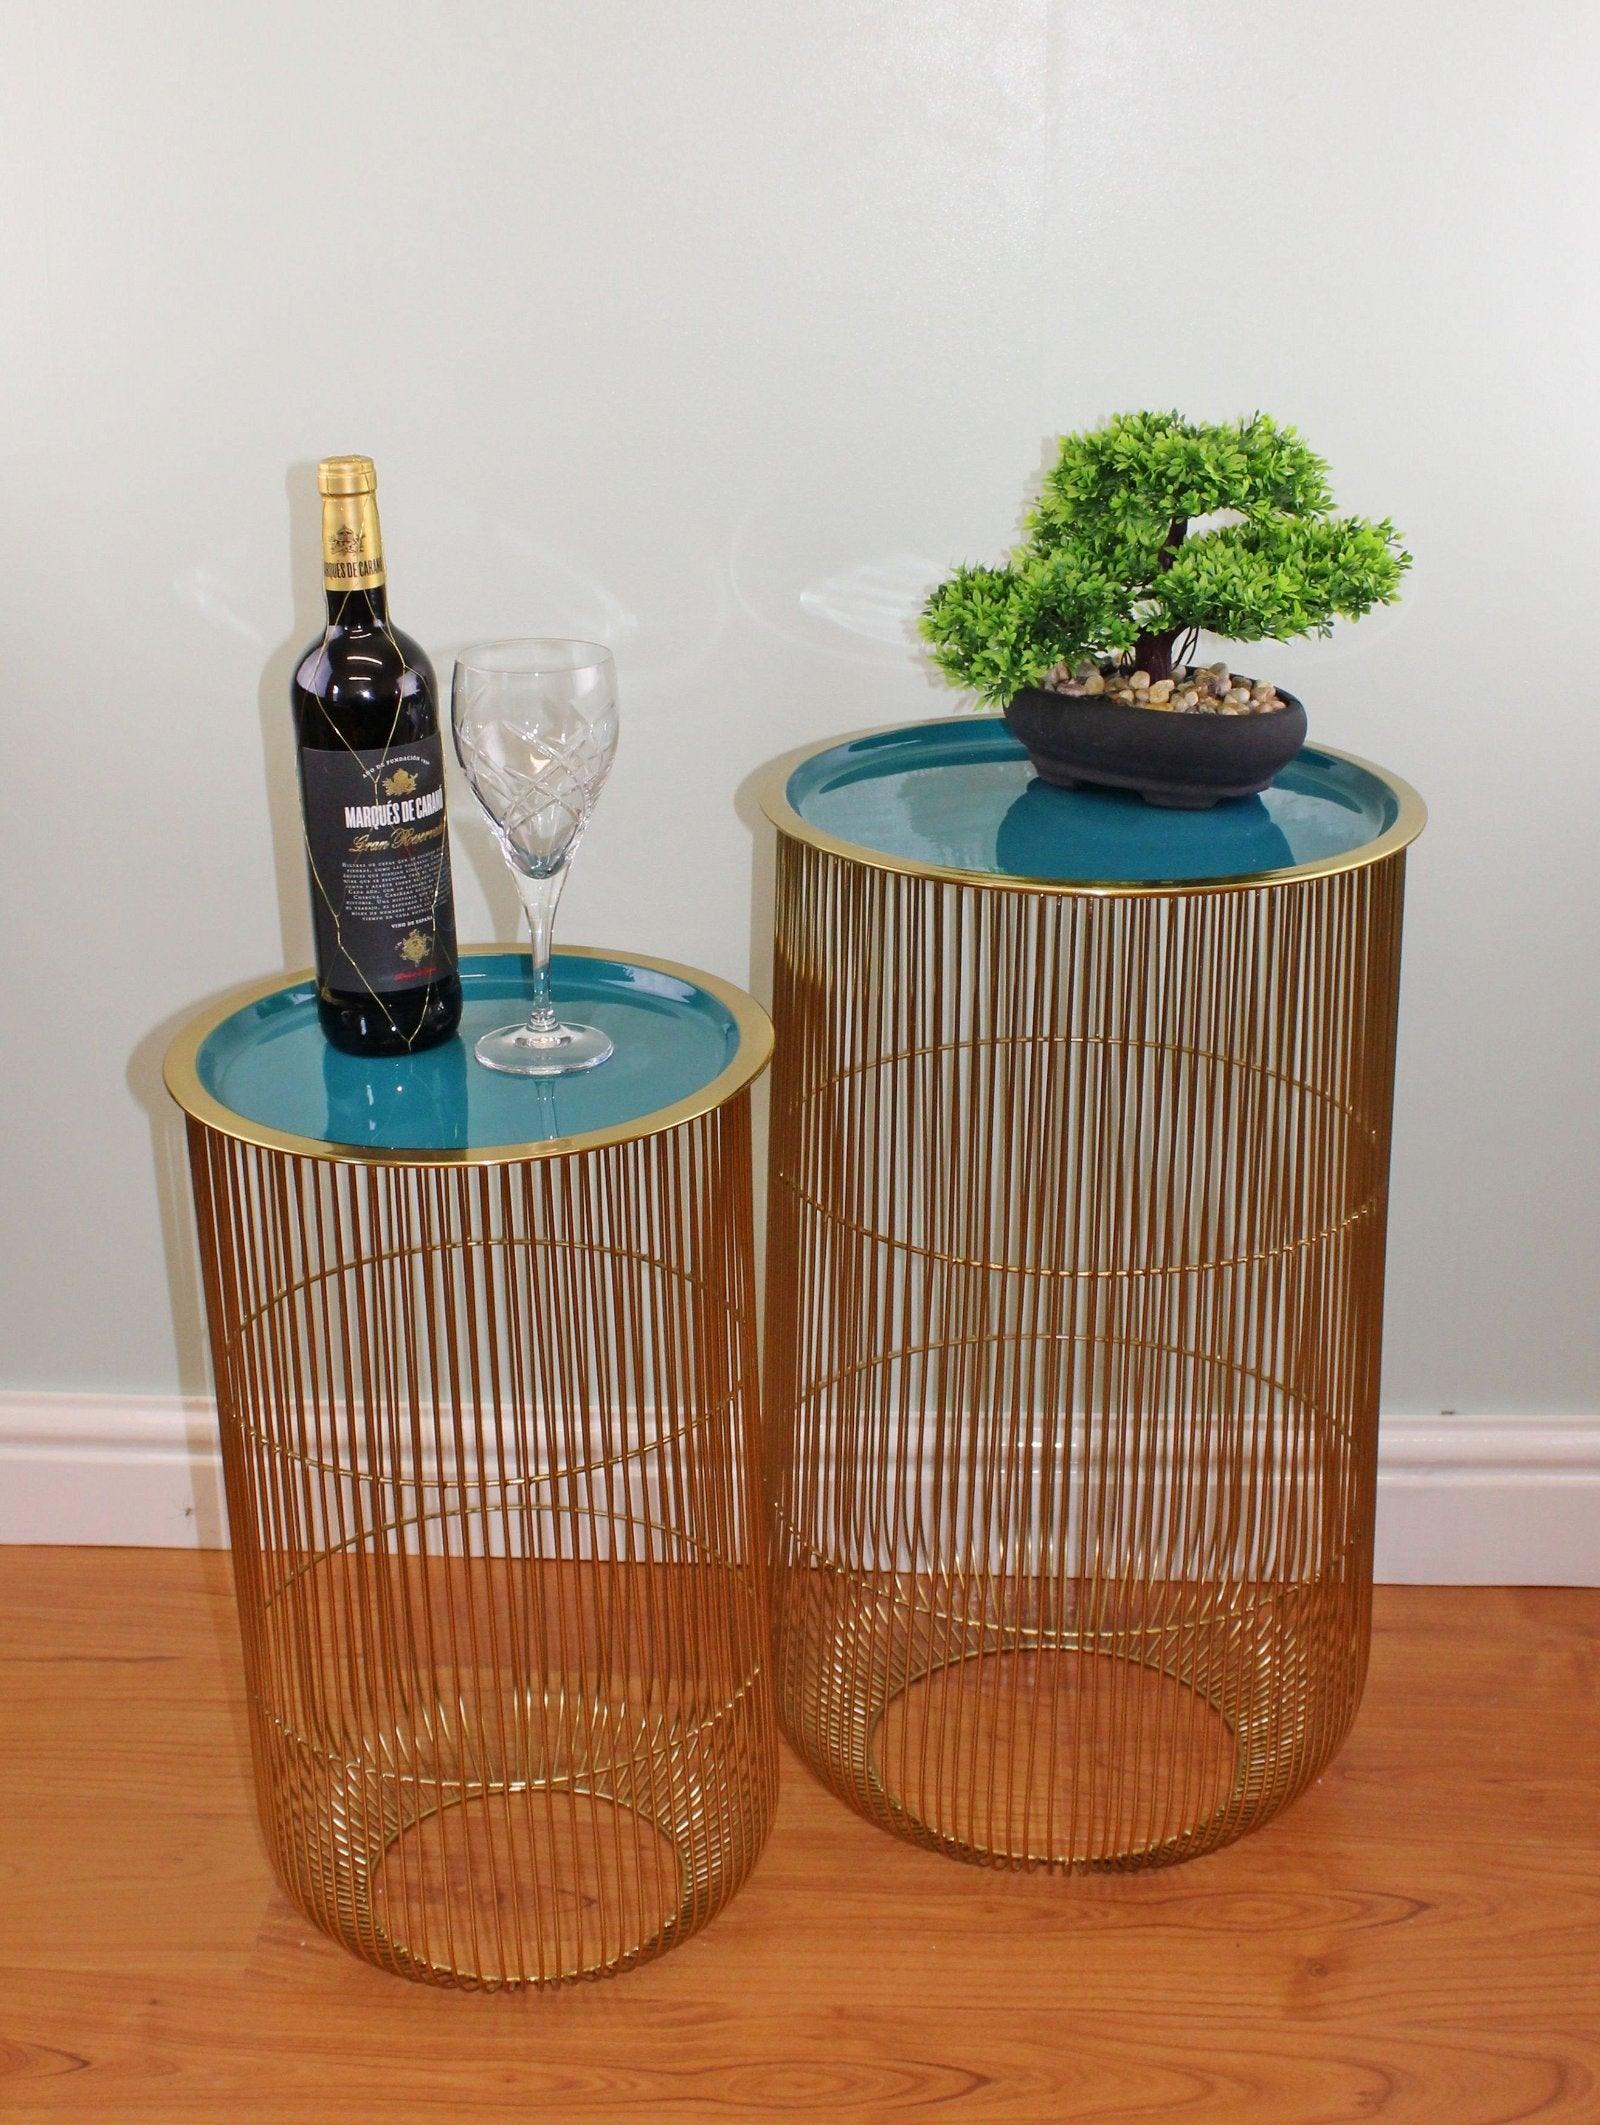 View Set of 2 Decorative Side Tables in Gold Teal information